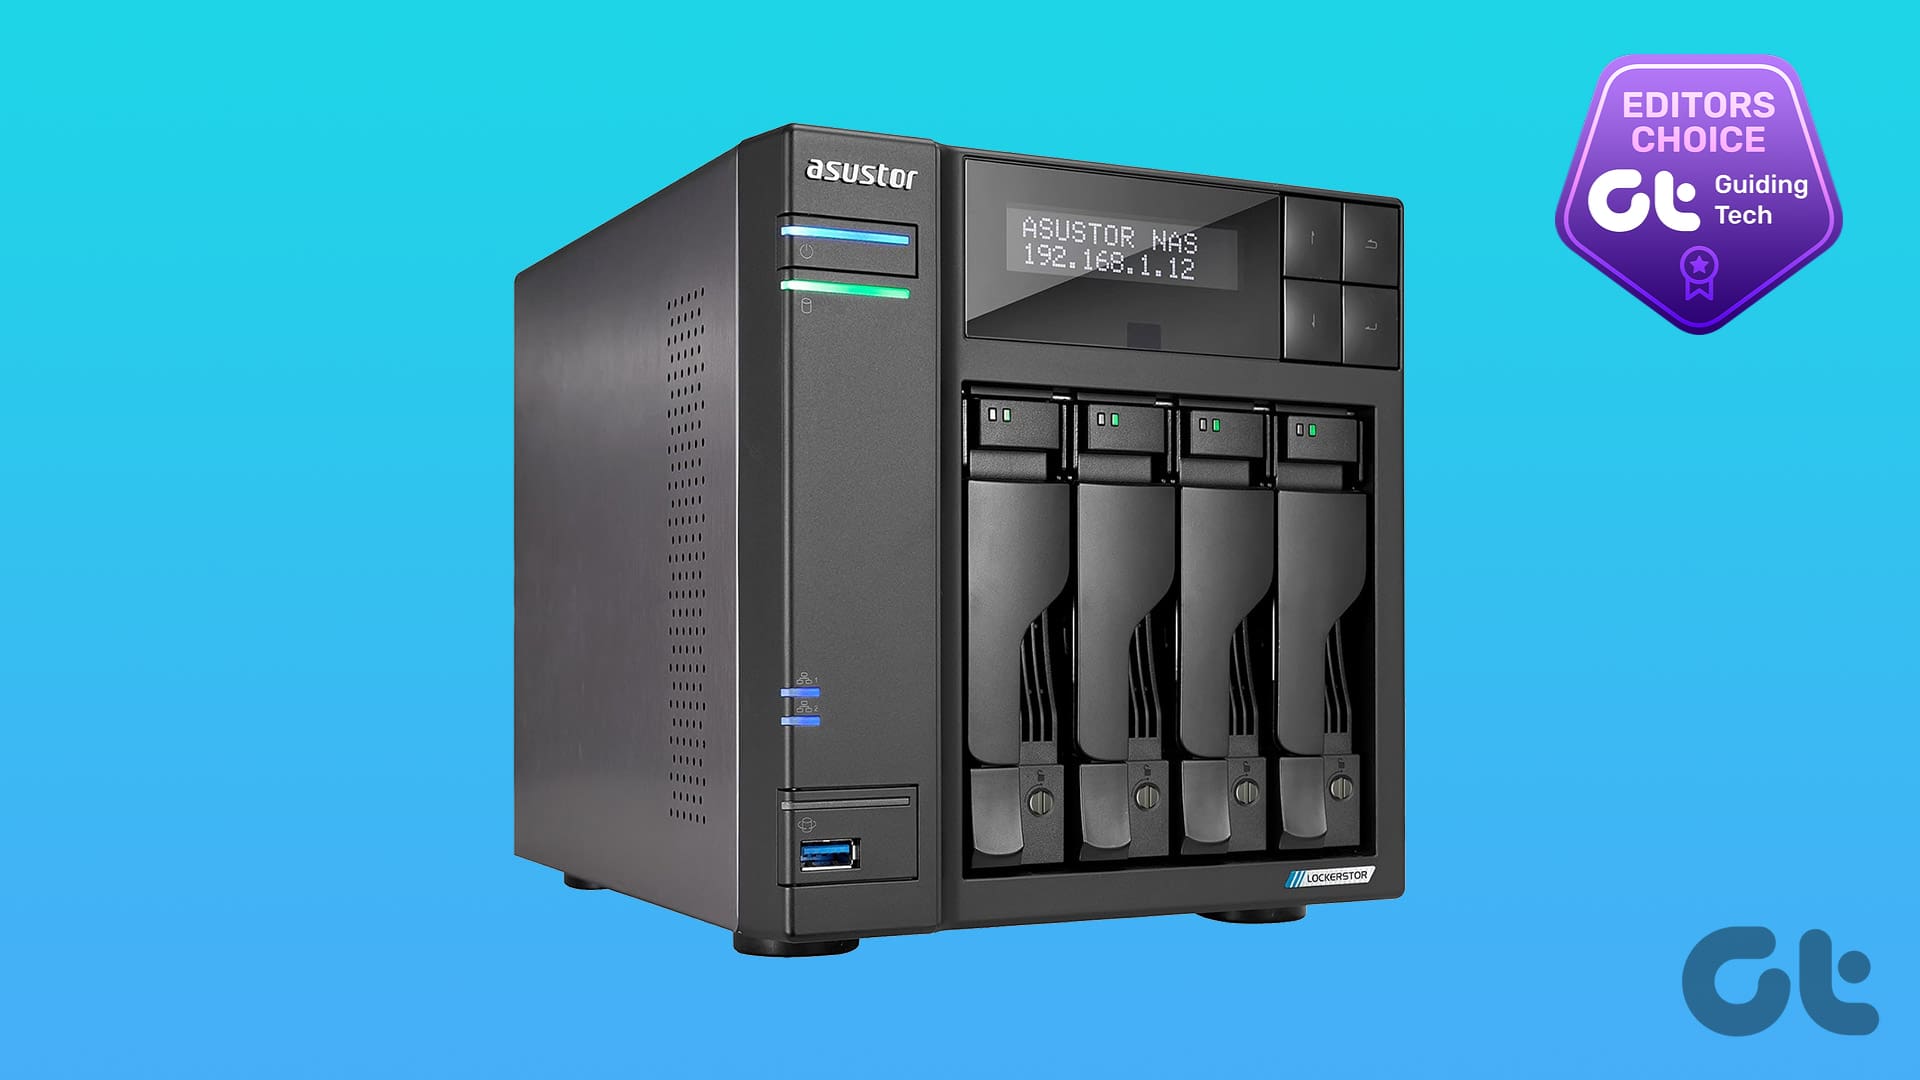 ASUSTOR NAS Buyer's Guide: How to pick the best NAS for you